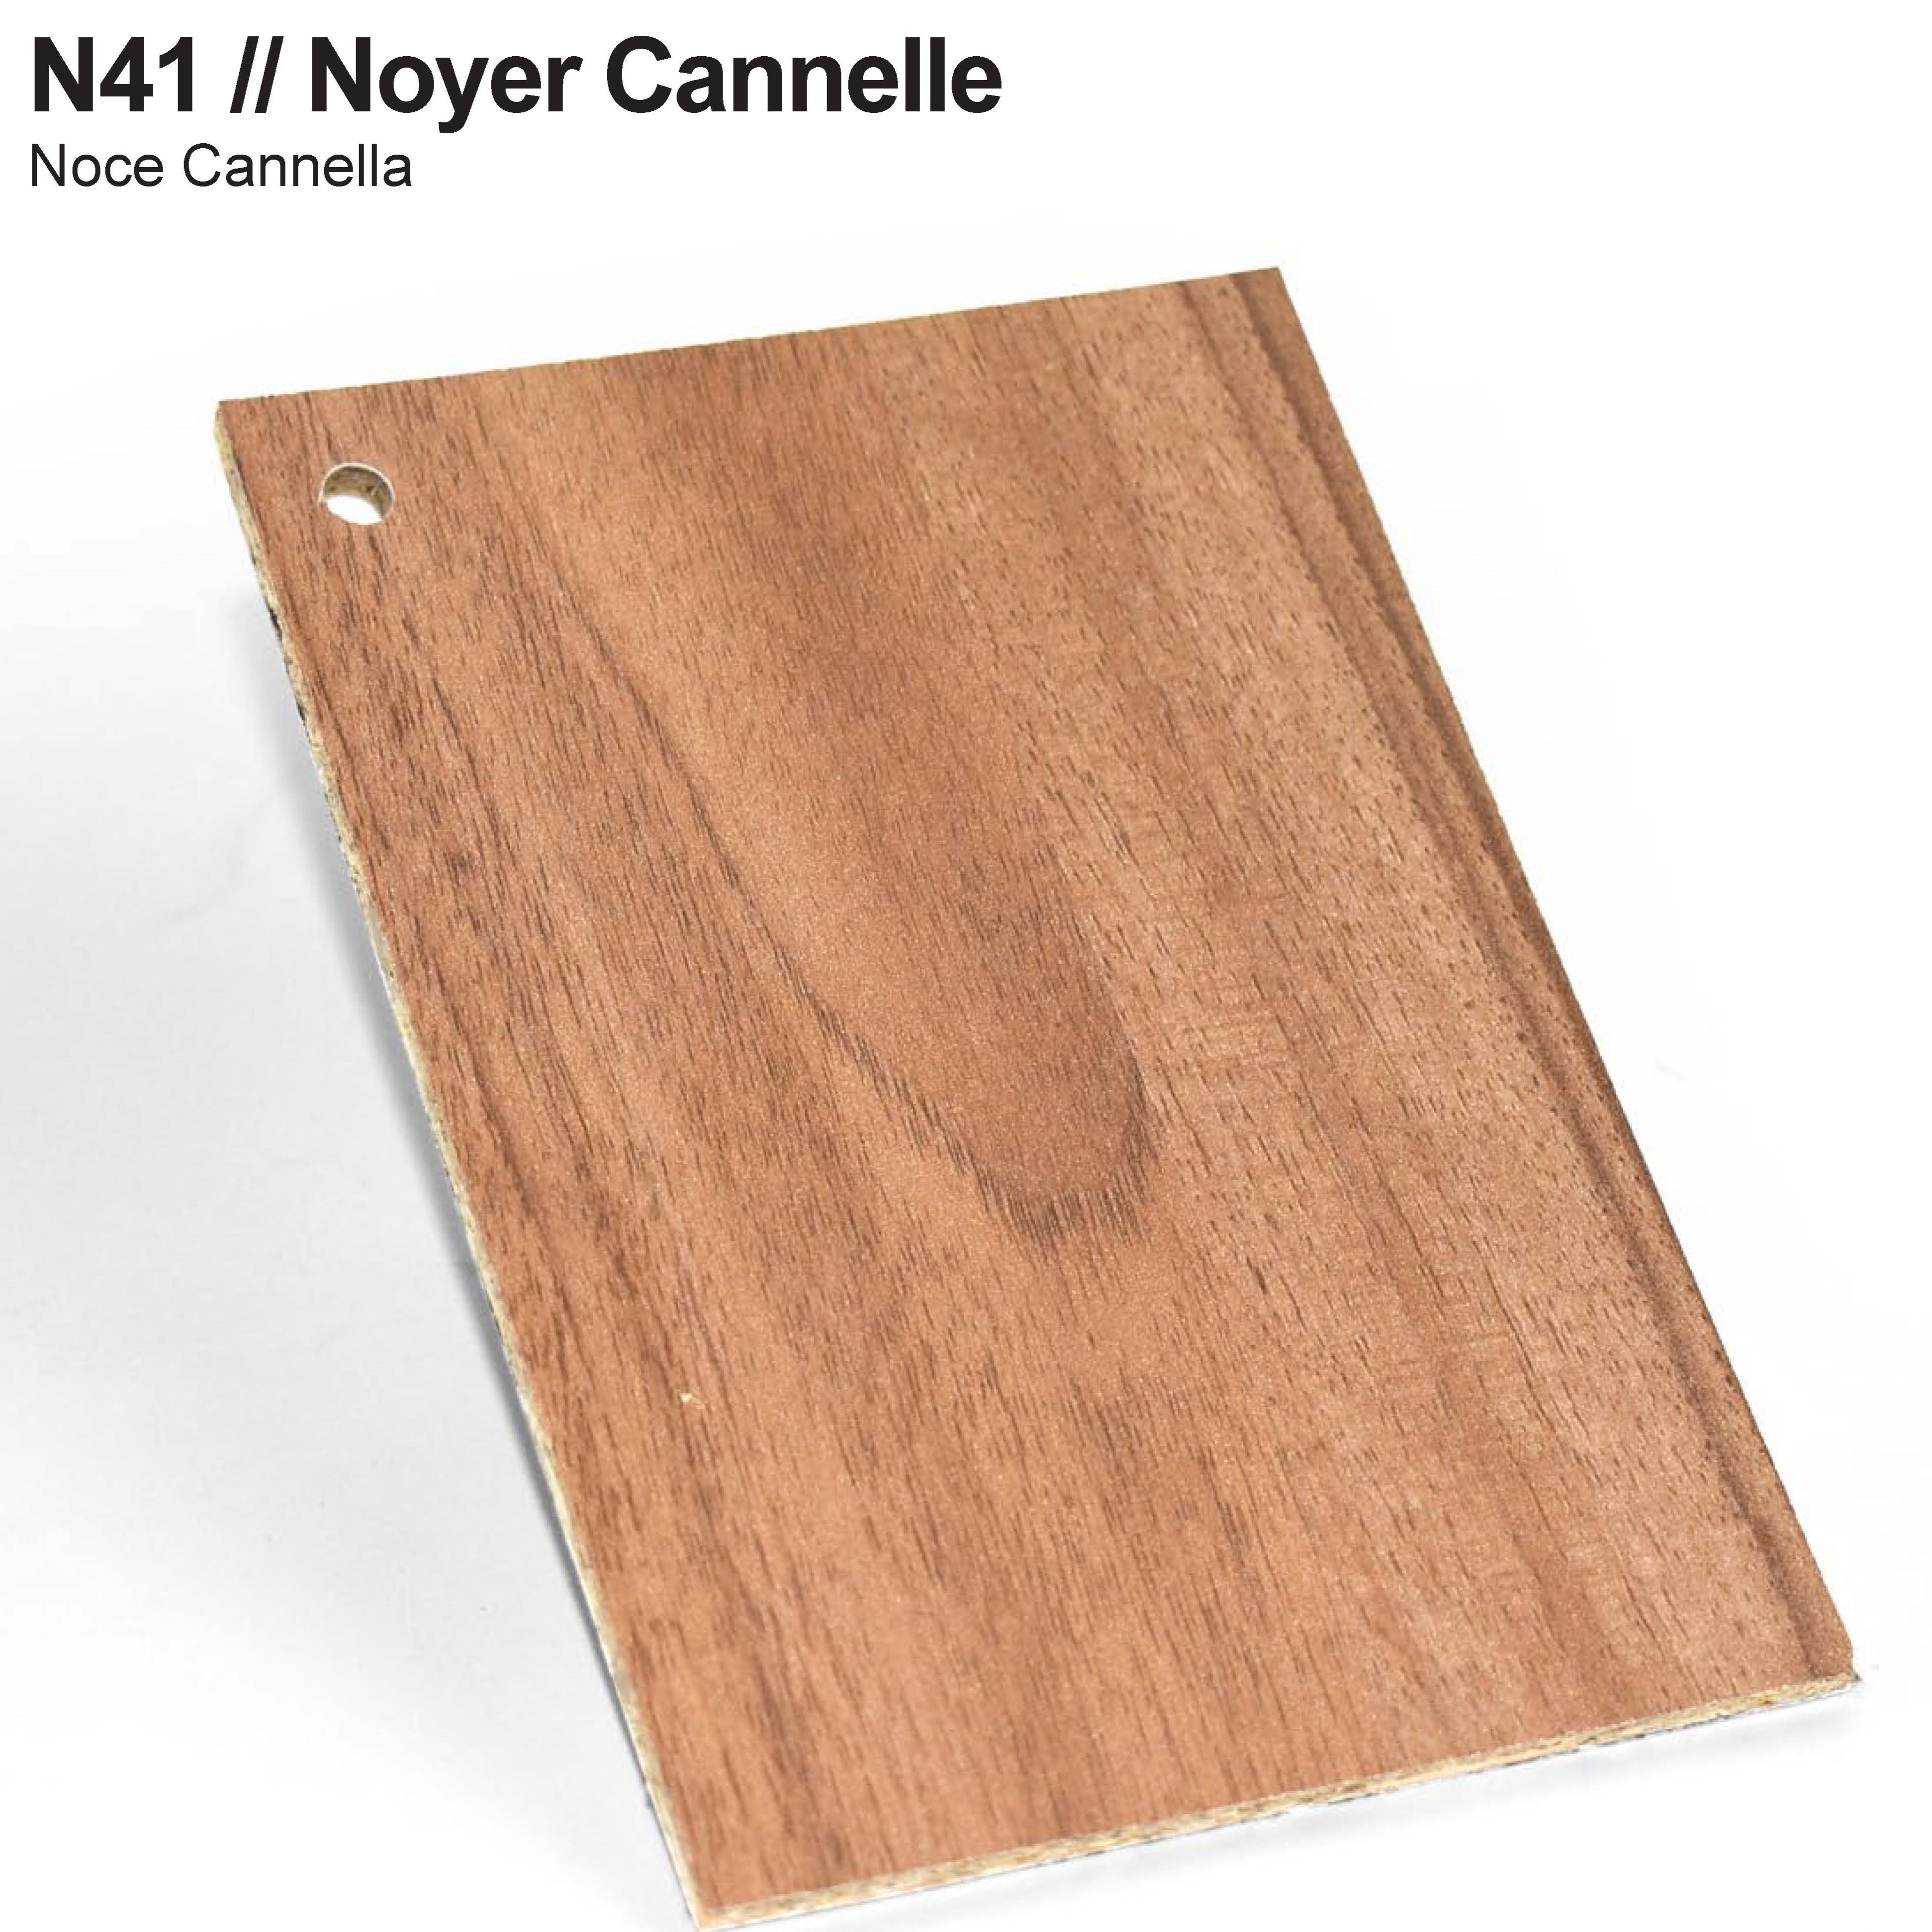 Noyer Cannelle N41